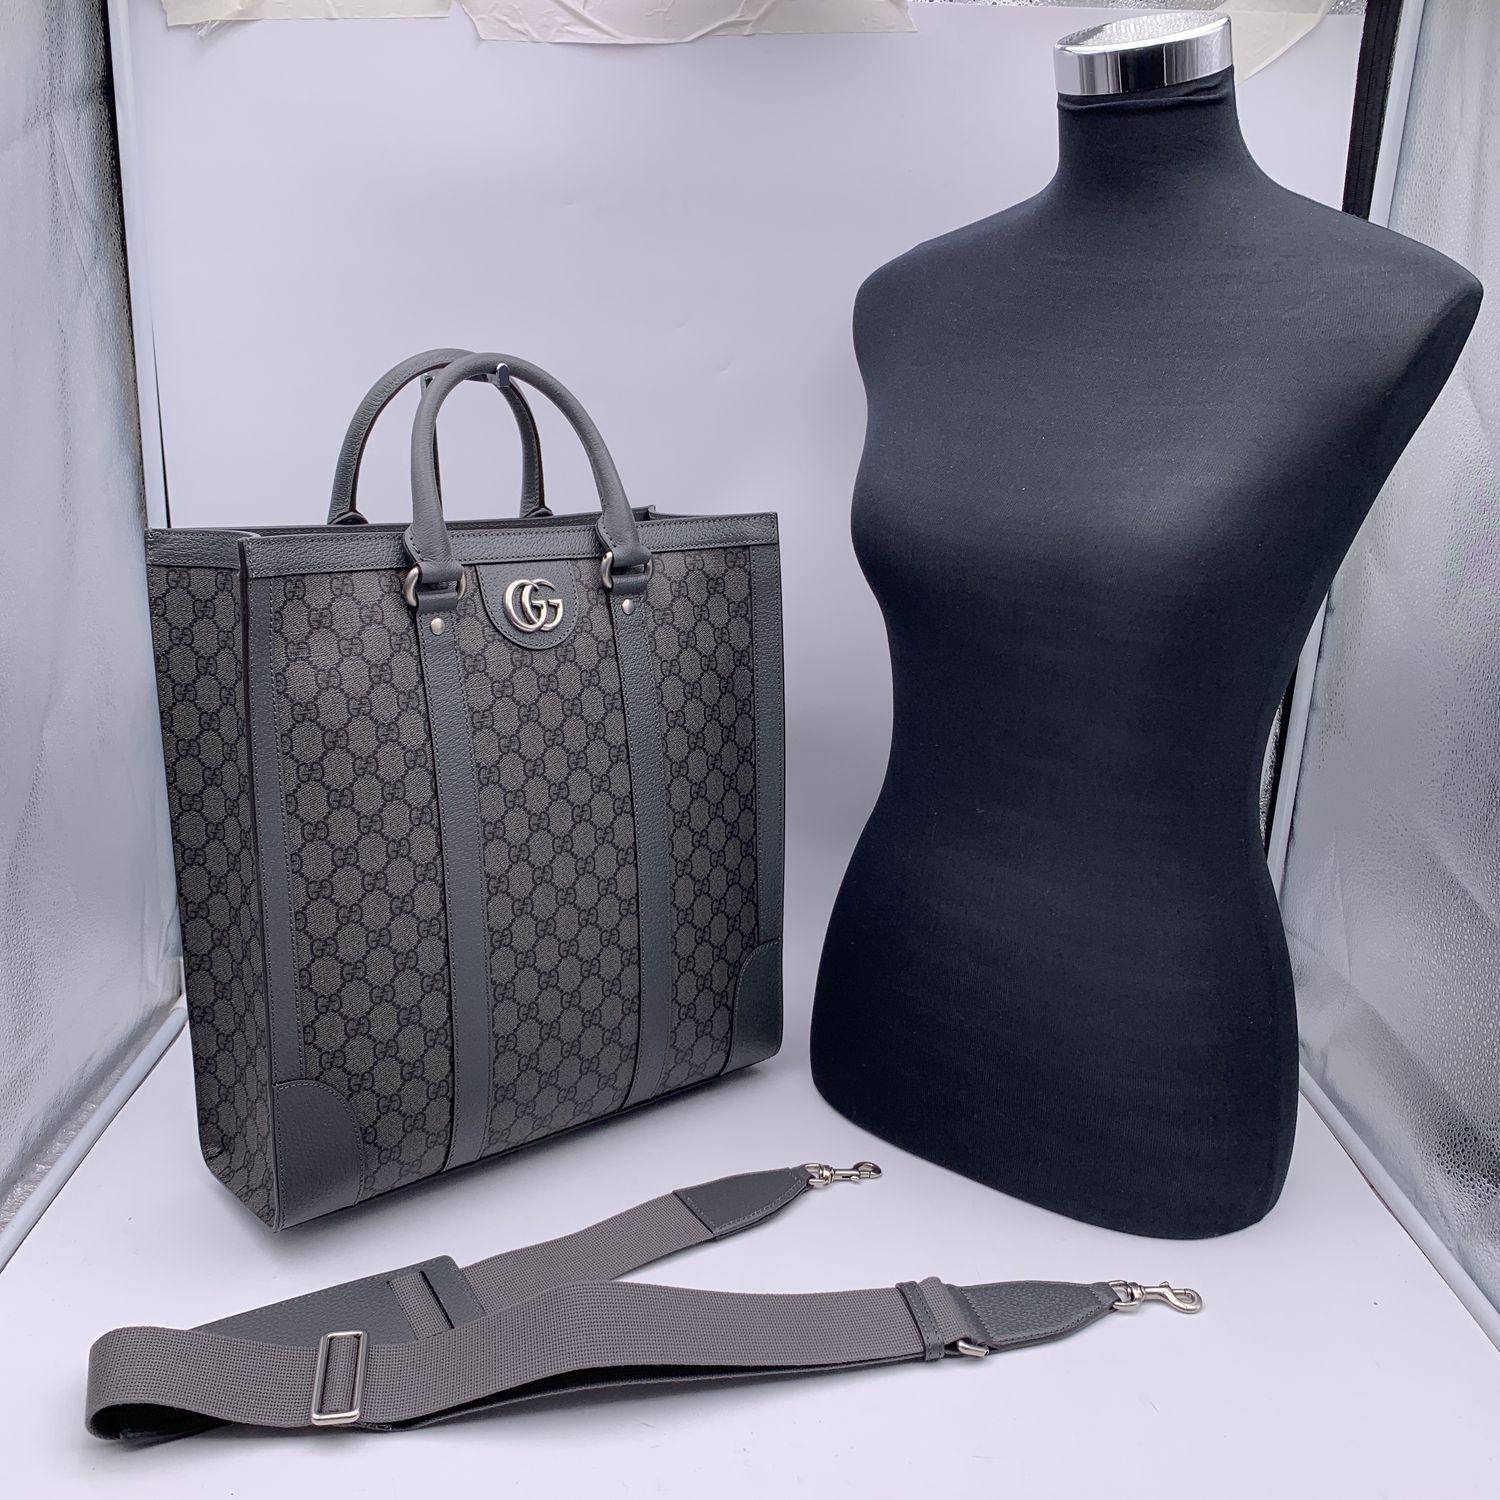 This beautiful Bag will come with a Certificate of Authenticity provided by Entrupy. The certificate will be provided at no further cost.

Gucci Ophidia shopping bag comes in a gray GG Supreme canvas. Gray leather finishes. Silver metal hardware.